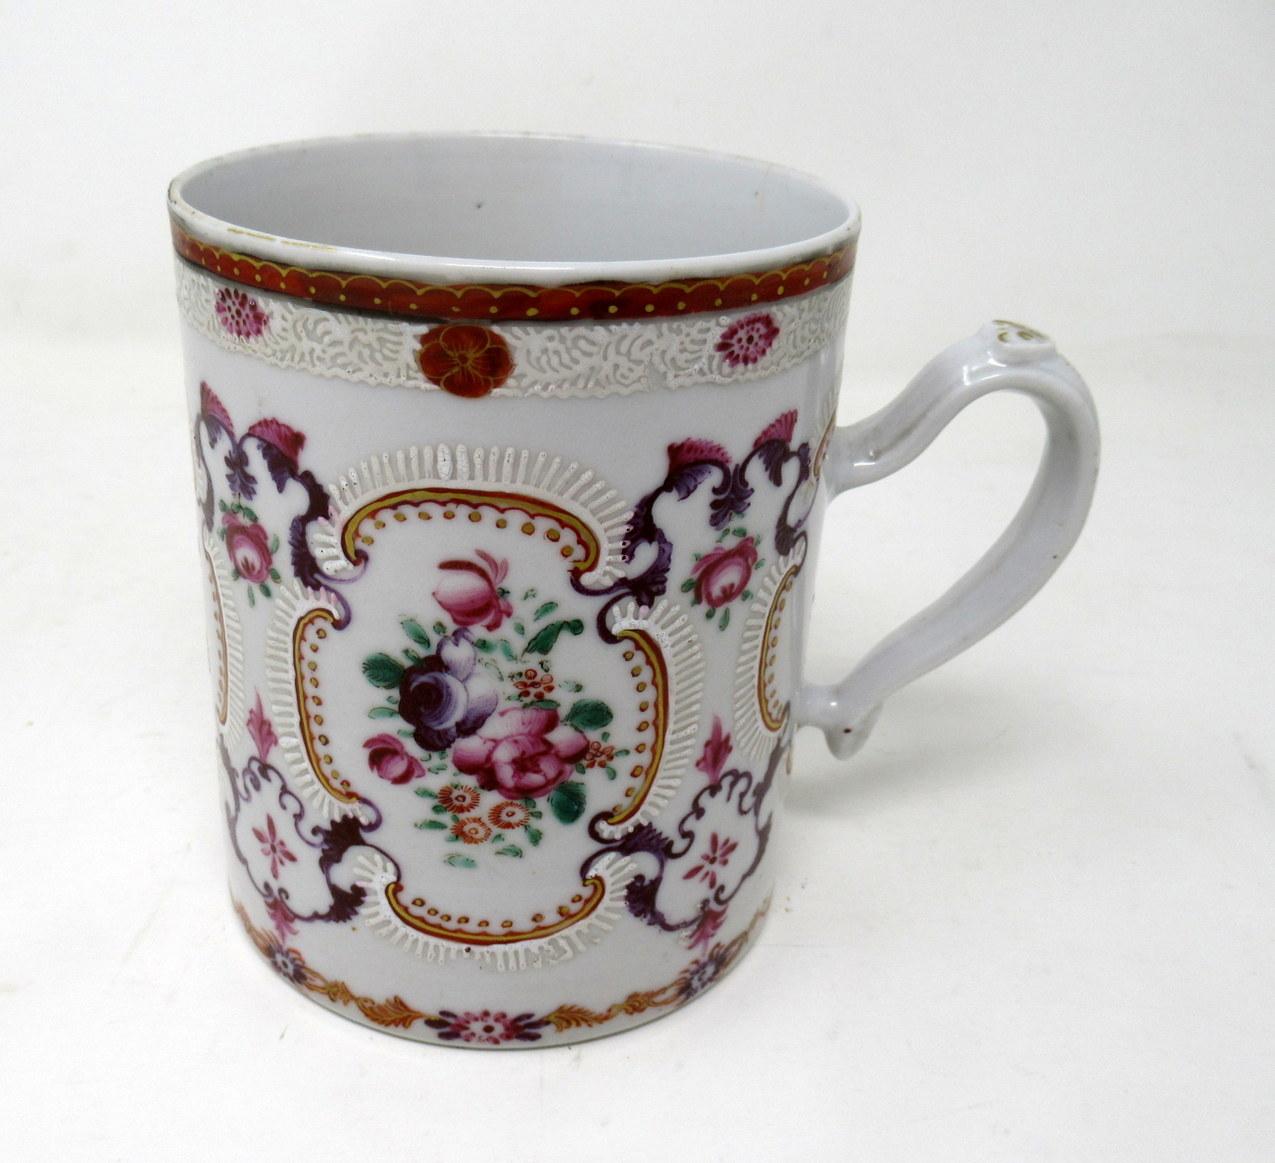 Fine Chinese porcelain Famille rose Mandarin Tankard mug of outstanding quality and impressive size.

Hand decorated in brightly colored enamels featuring four large central panels depicting beautifully hand painted summer flowers and old roses